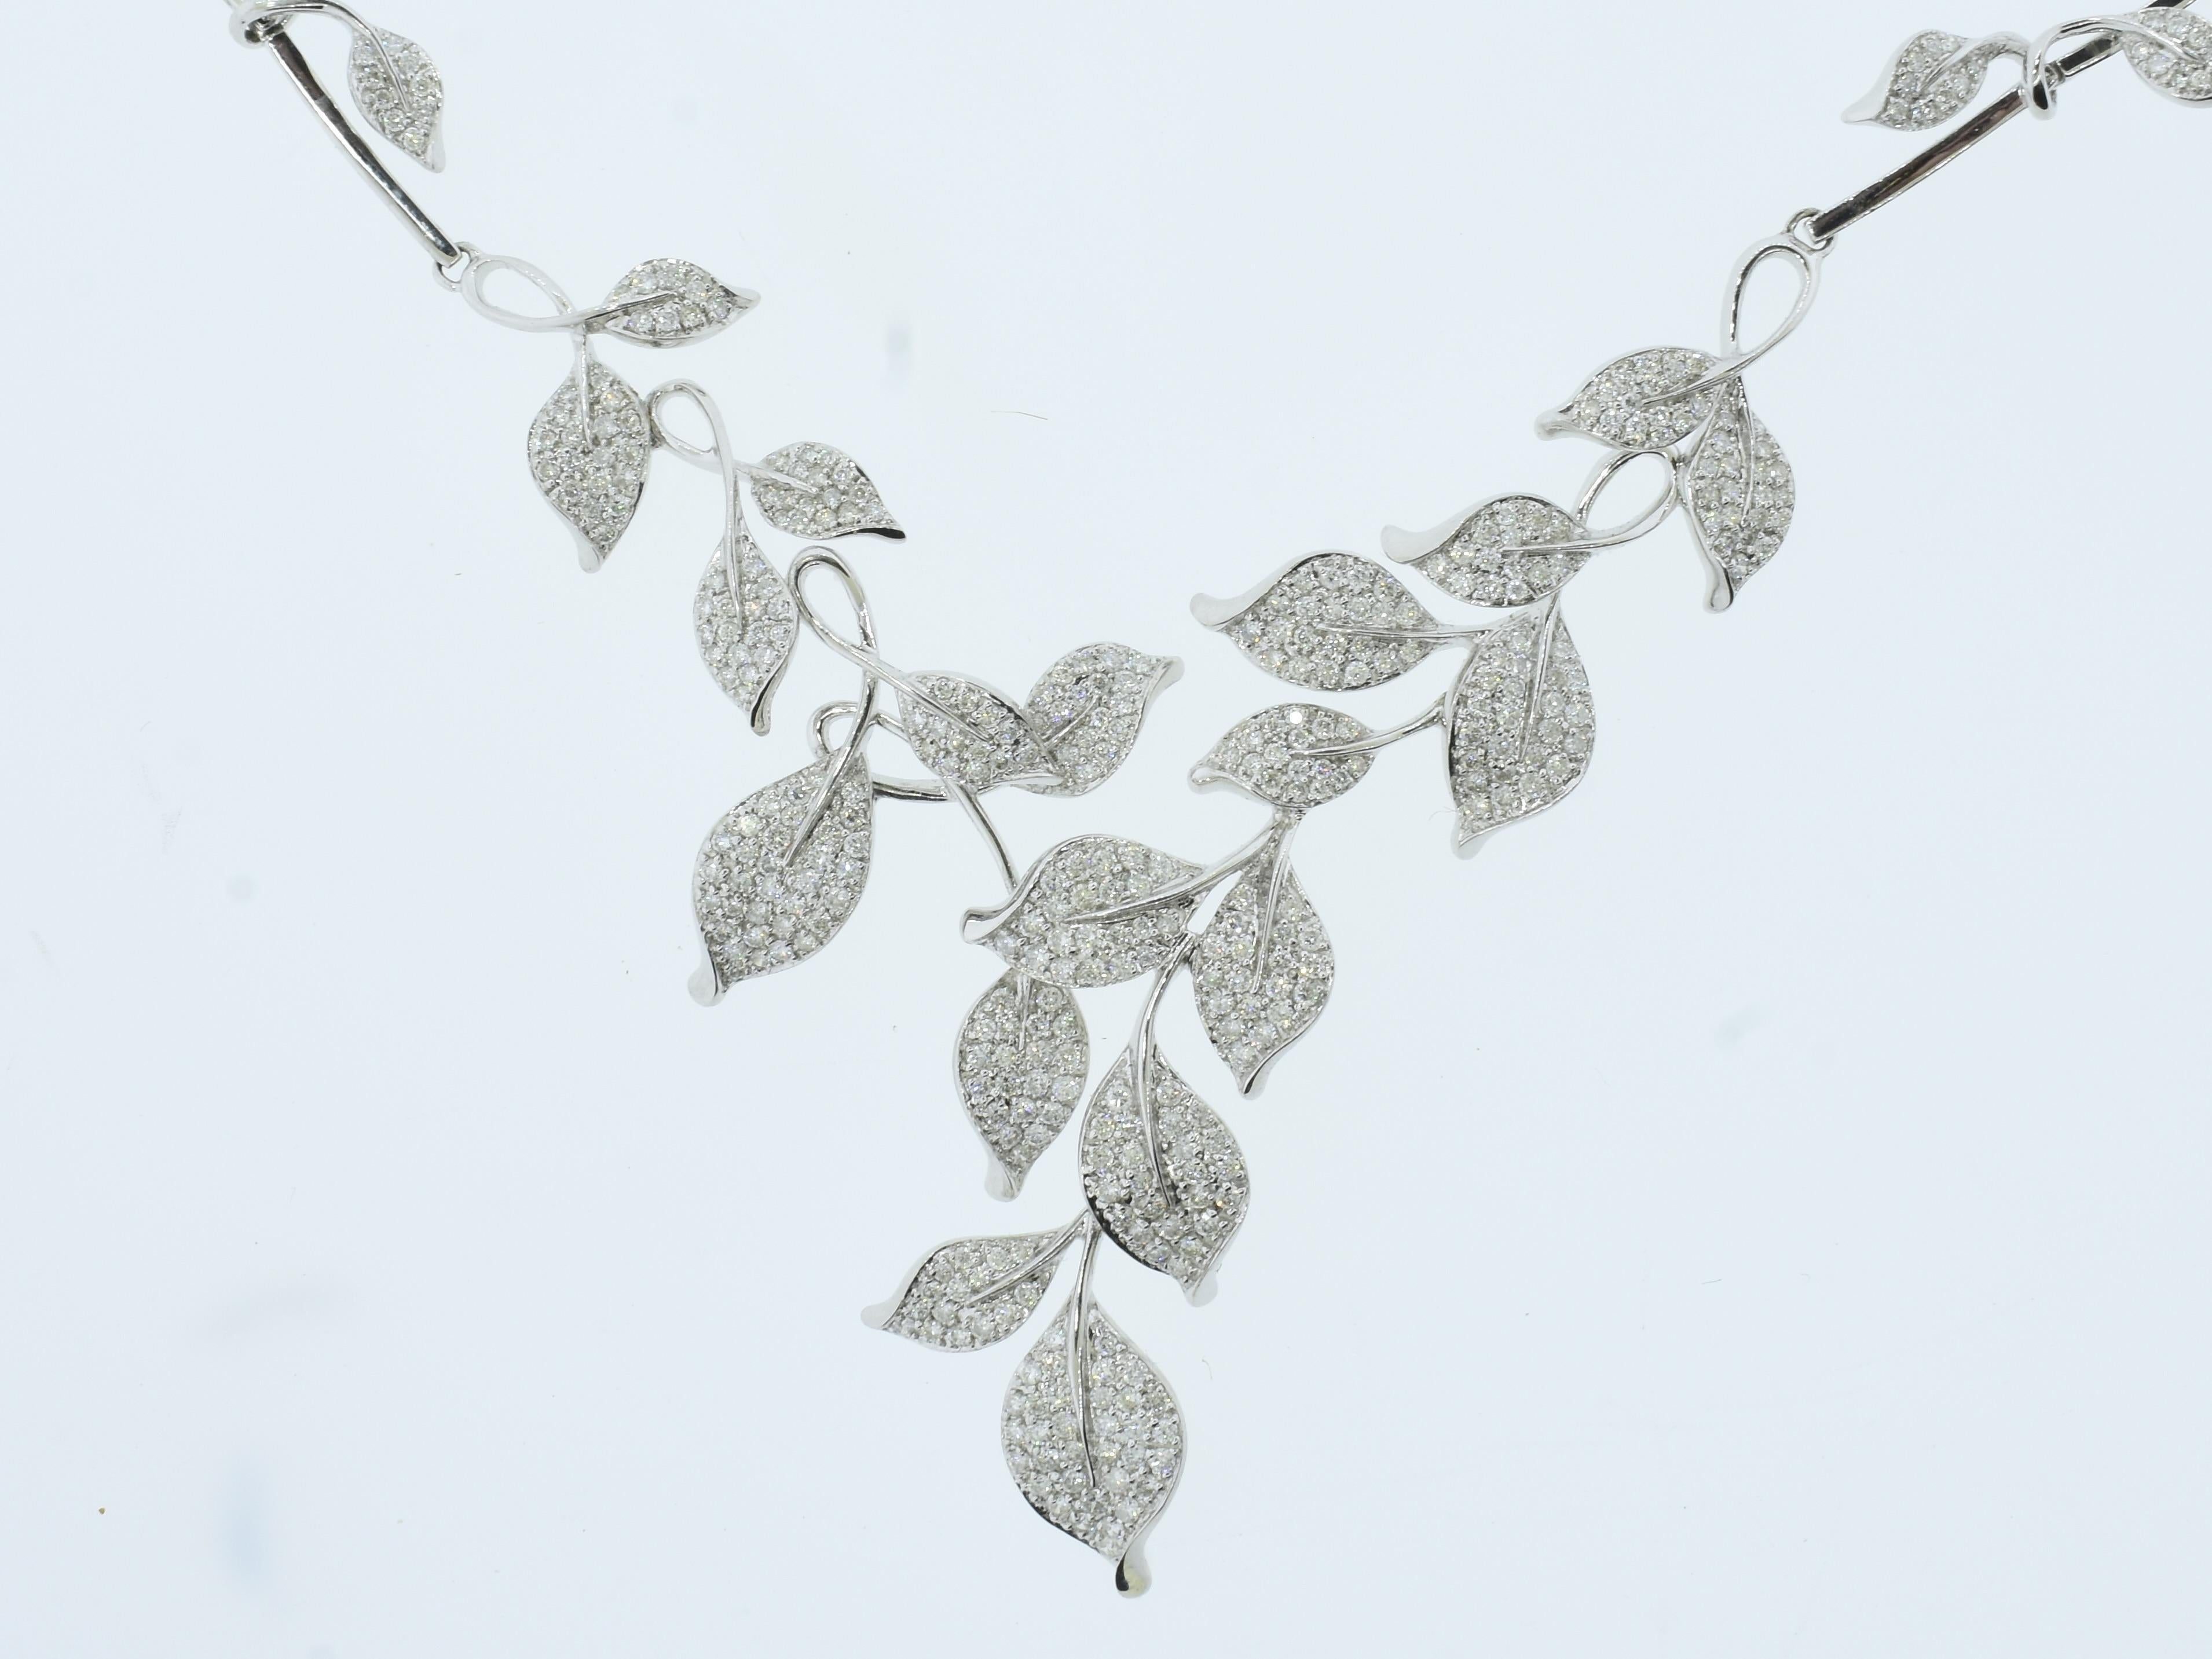 Brilliant Cut Diamond and 18K White Gold Contemporary Necklace of Stylized Foliage. For Sale